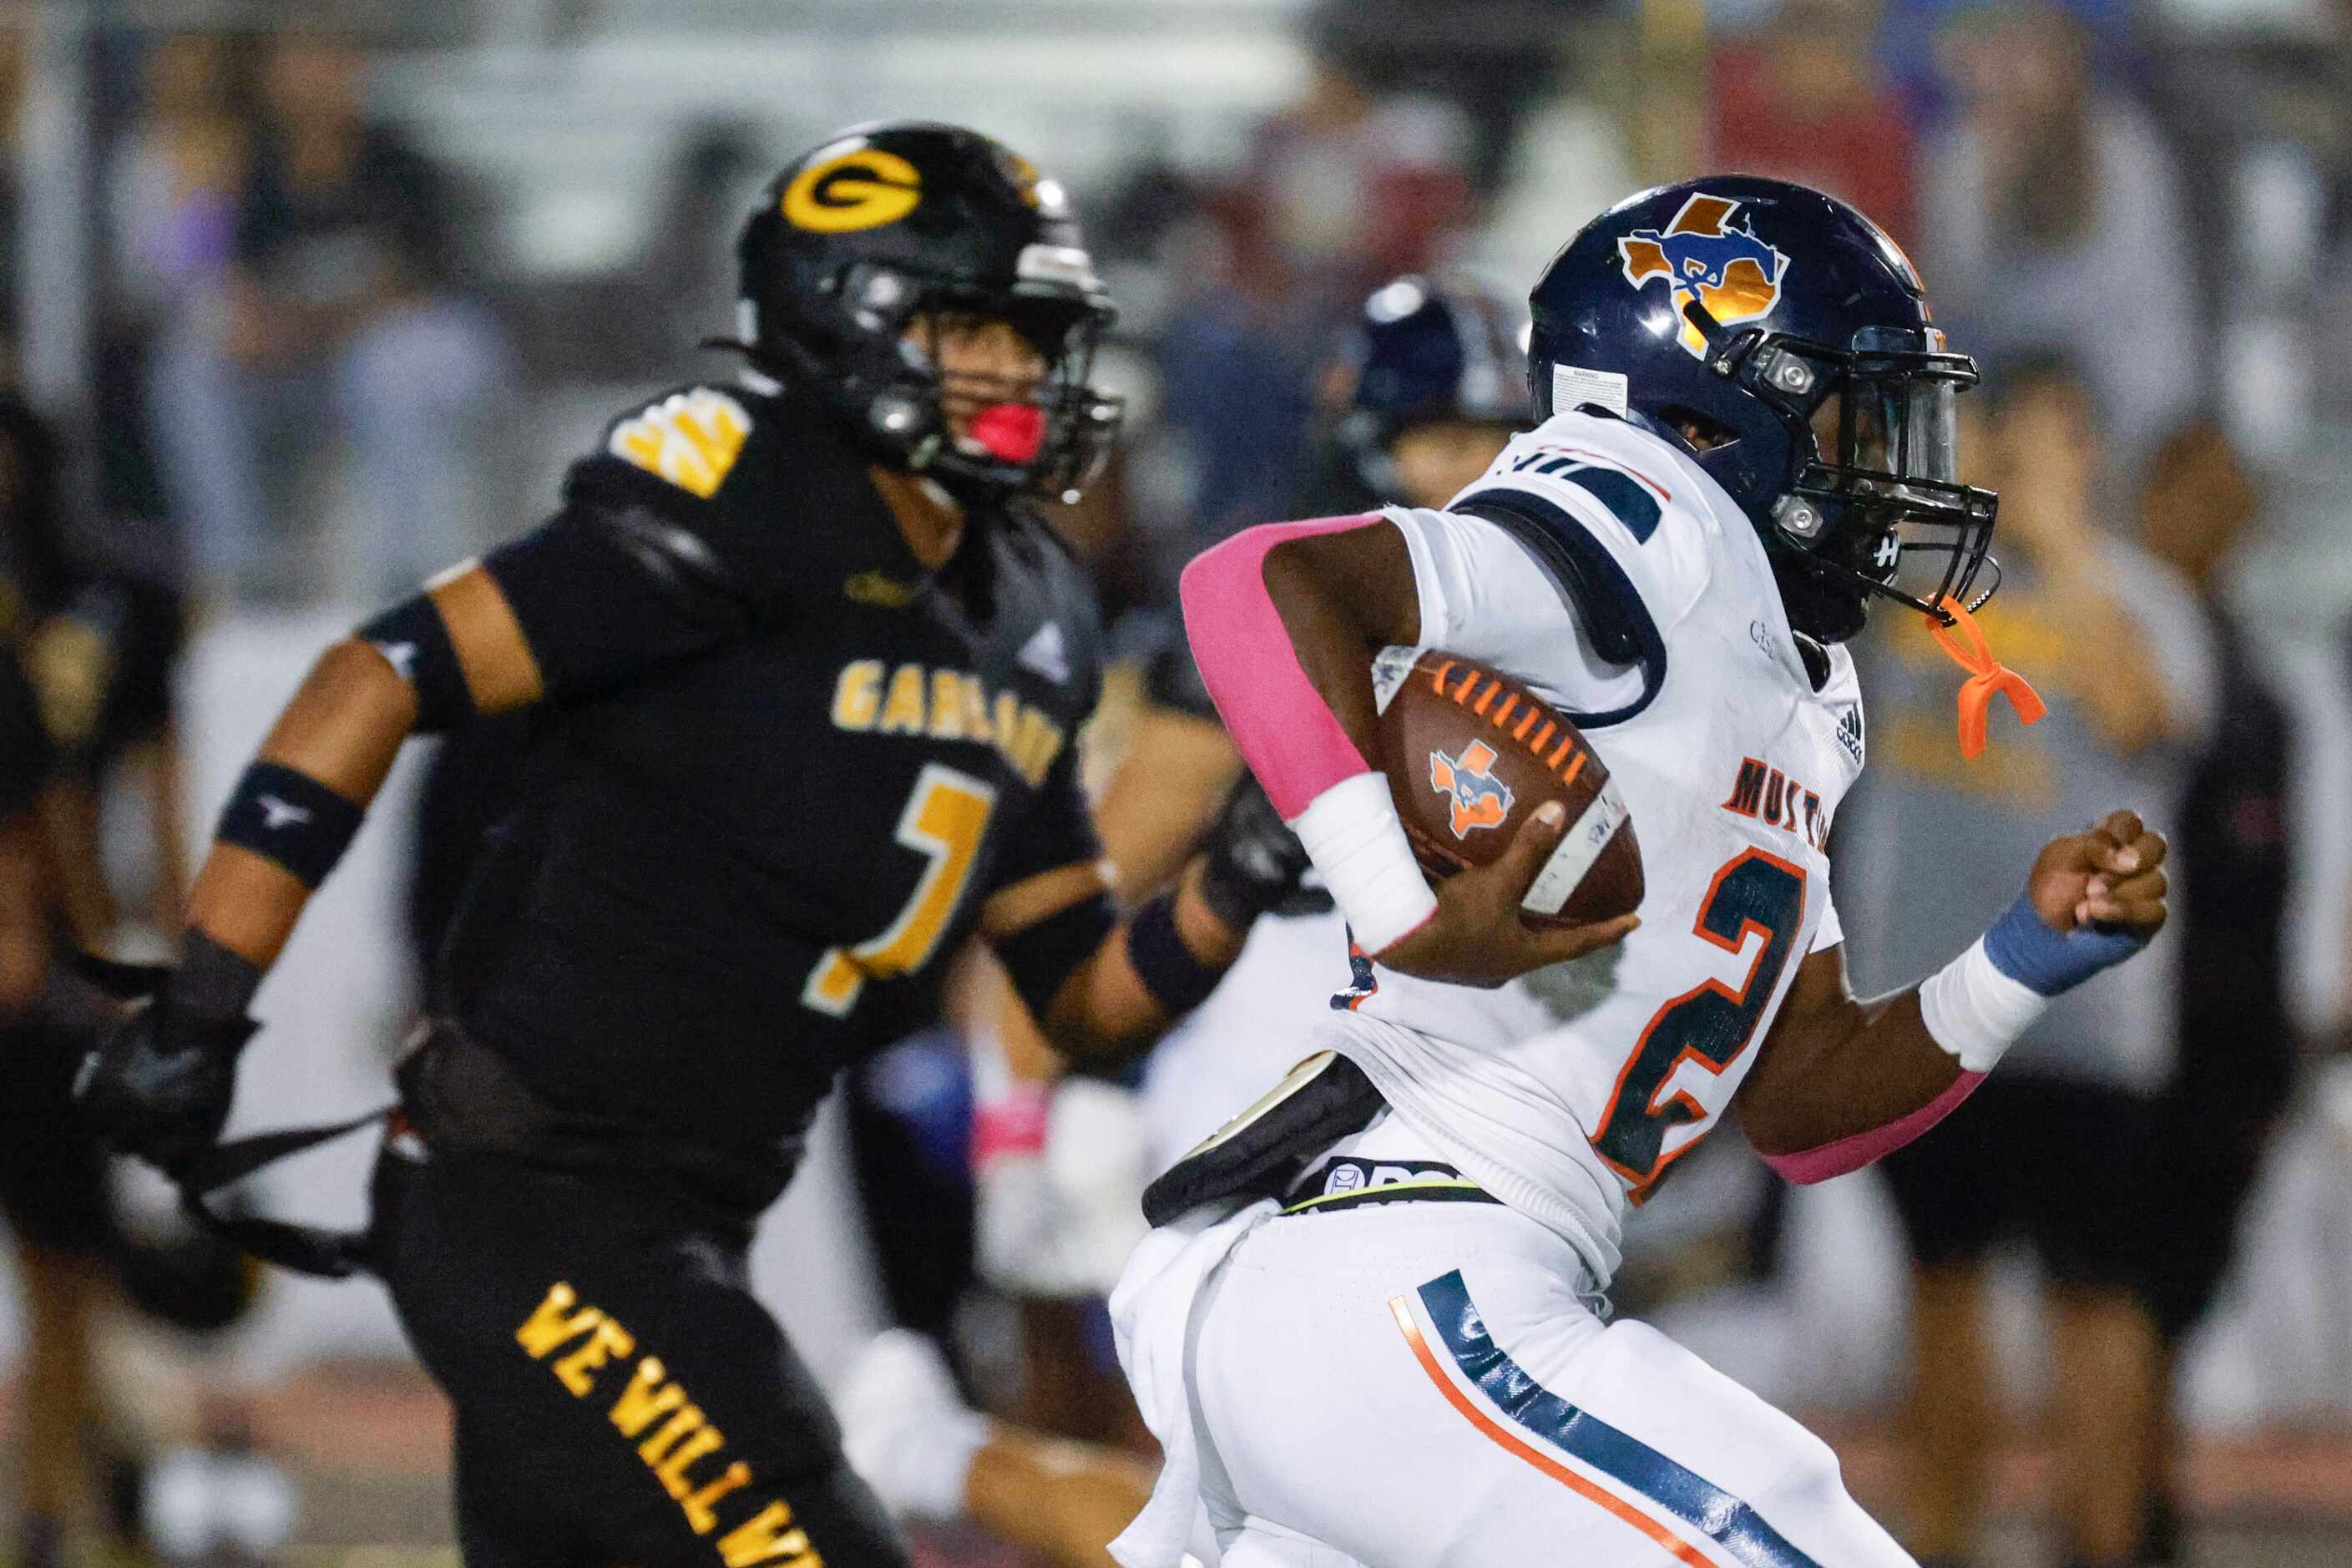 Sachse high school’s Brendon Haygood (28) runs with the ball during the second half of a...